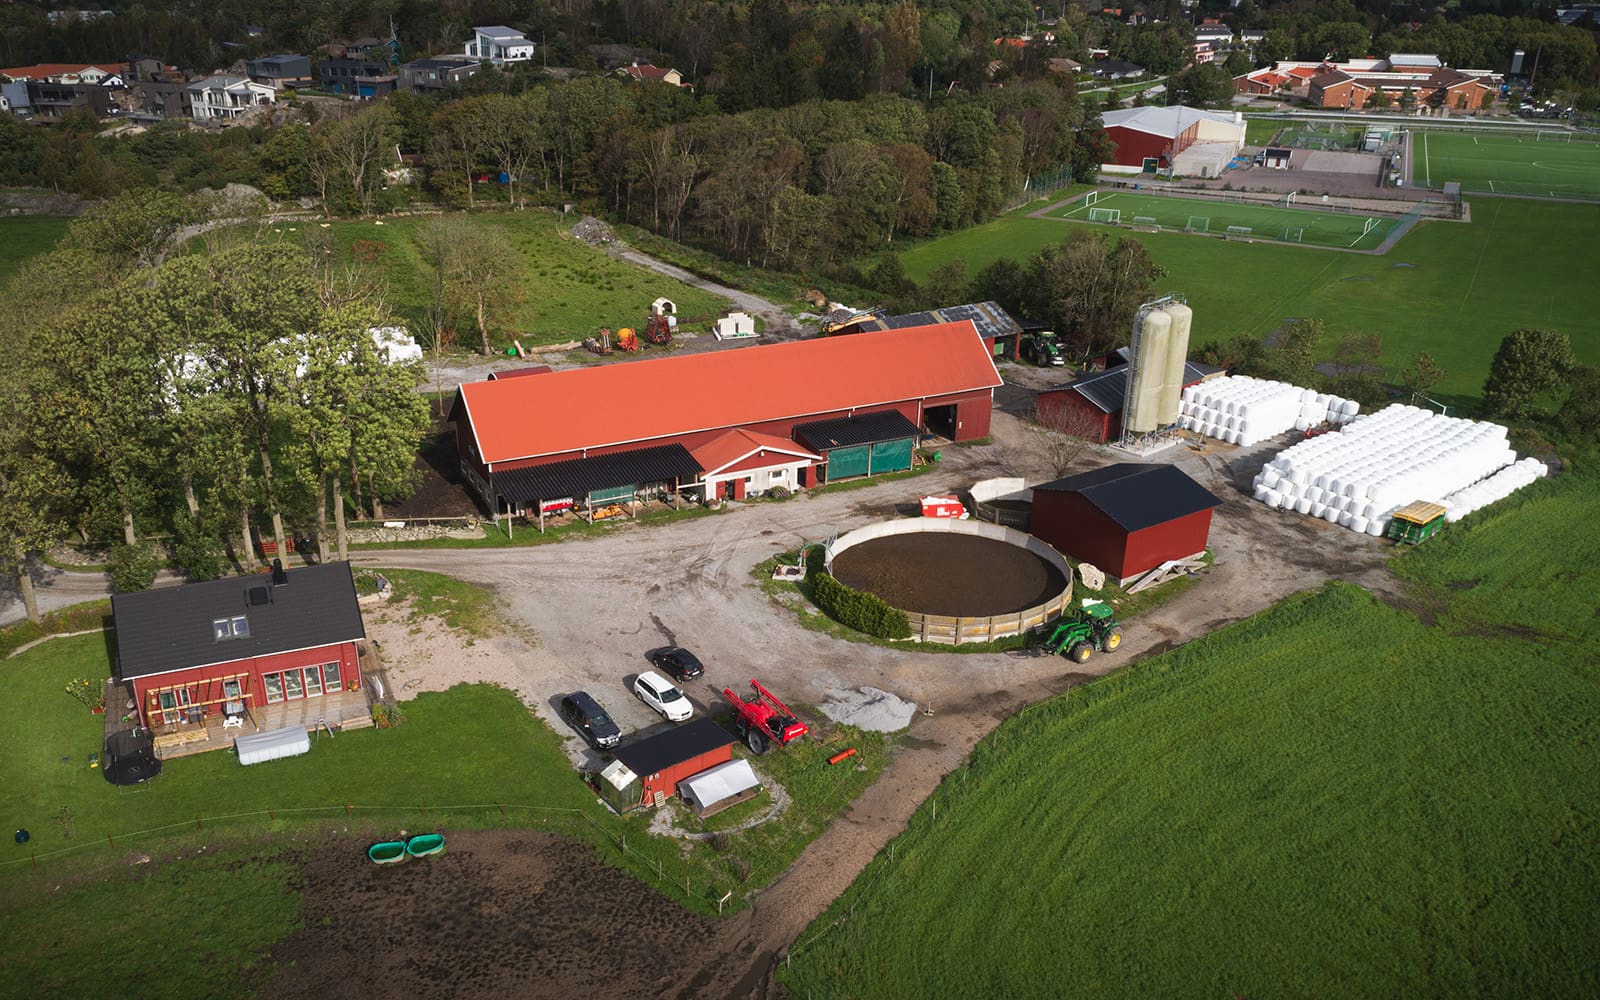 South of Stenungsund, Anrås Gård is run, so far as a leasehold, by Pontus and Mathilda Sandén. The milking parlour, with a tied-up system of short stalls and tube milking, was rebuilt after a fire in 1994 and has room for 55 yearling cows and recruitment. On a nearby farm that the couple also leases, there is a stable with room for 120 bulls that are raised for slaughter. These are partly the farm&amp;amp;amp;amp;amp;amp;#039;s own dairy bulls and partly bulls that are bought half a year old in the autumn and sent for slaughter about a year later.